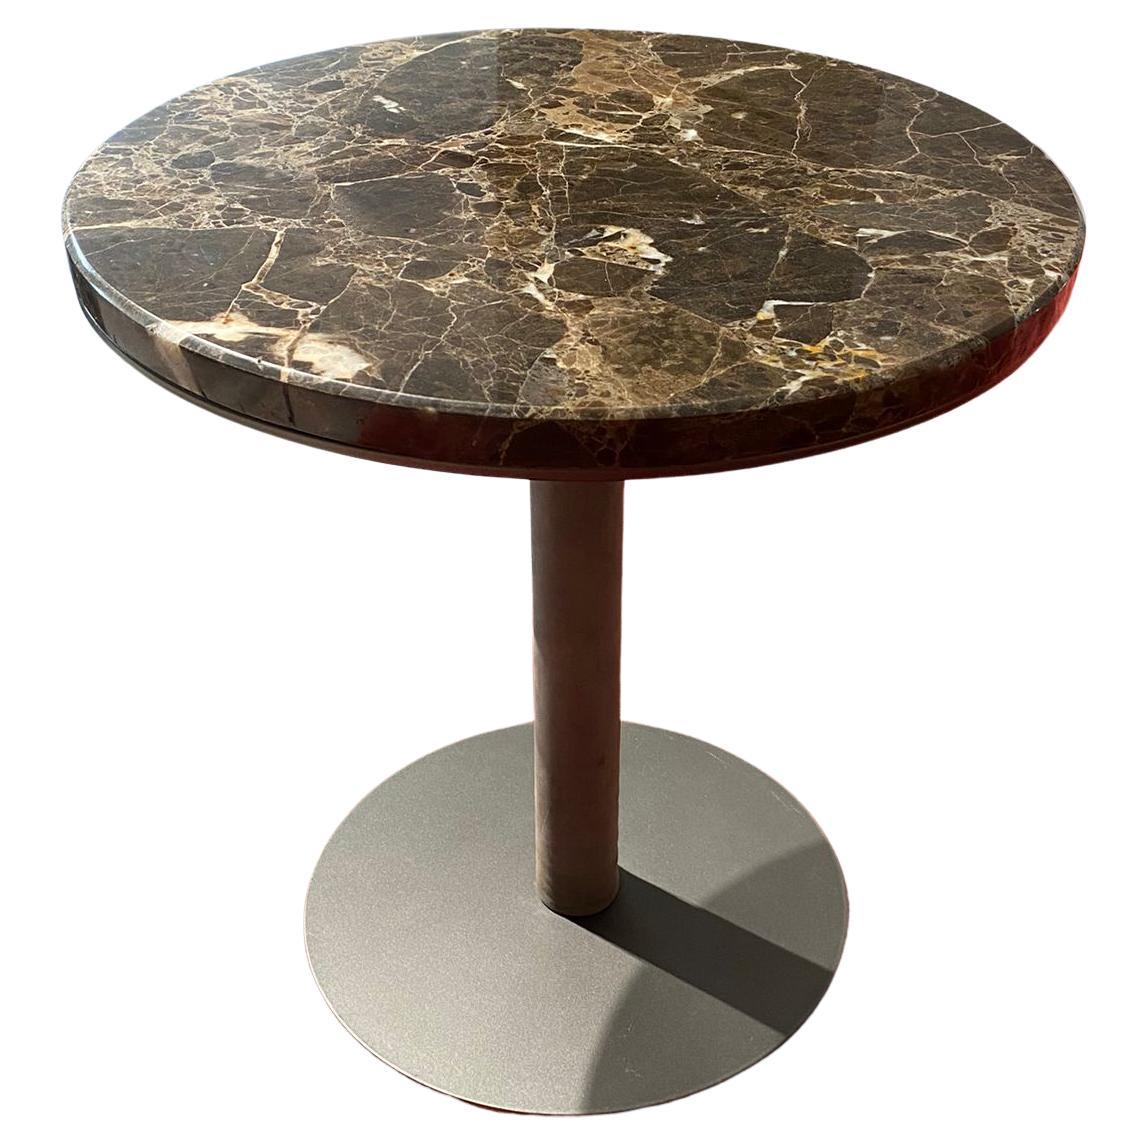 Daniel servetto, marble top, leather-covered leg, metal base For Sale